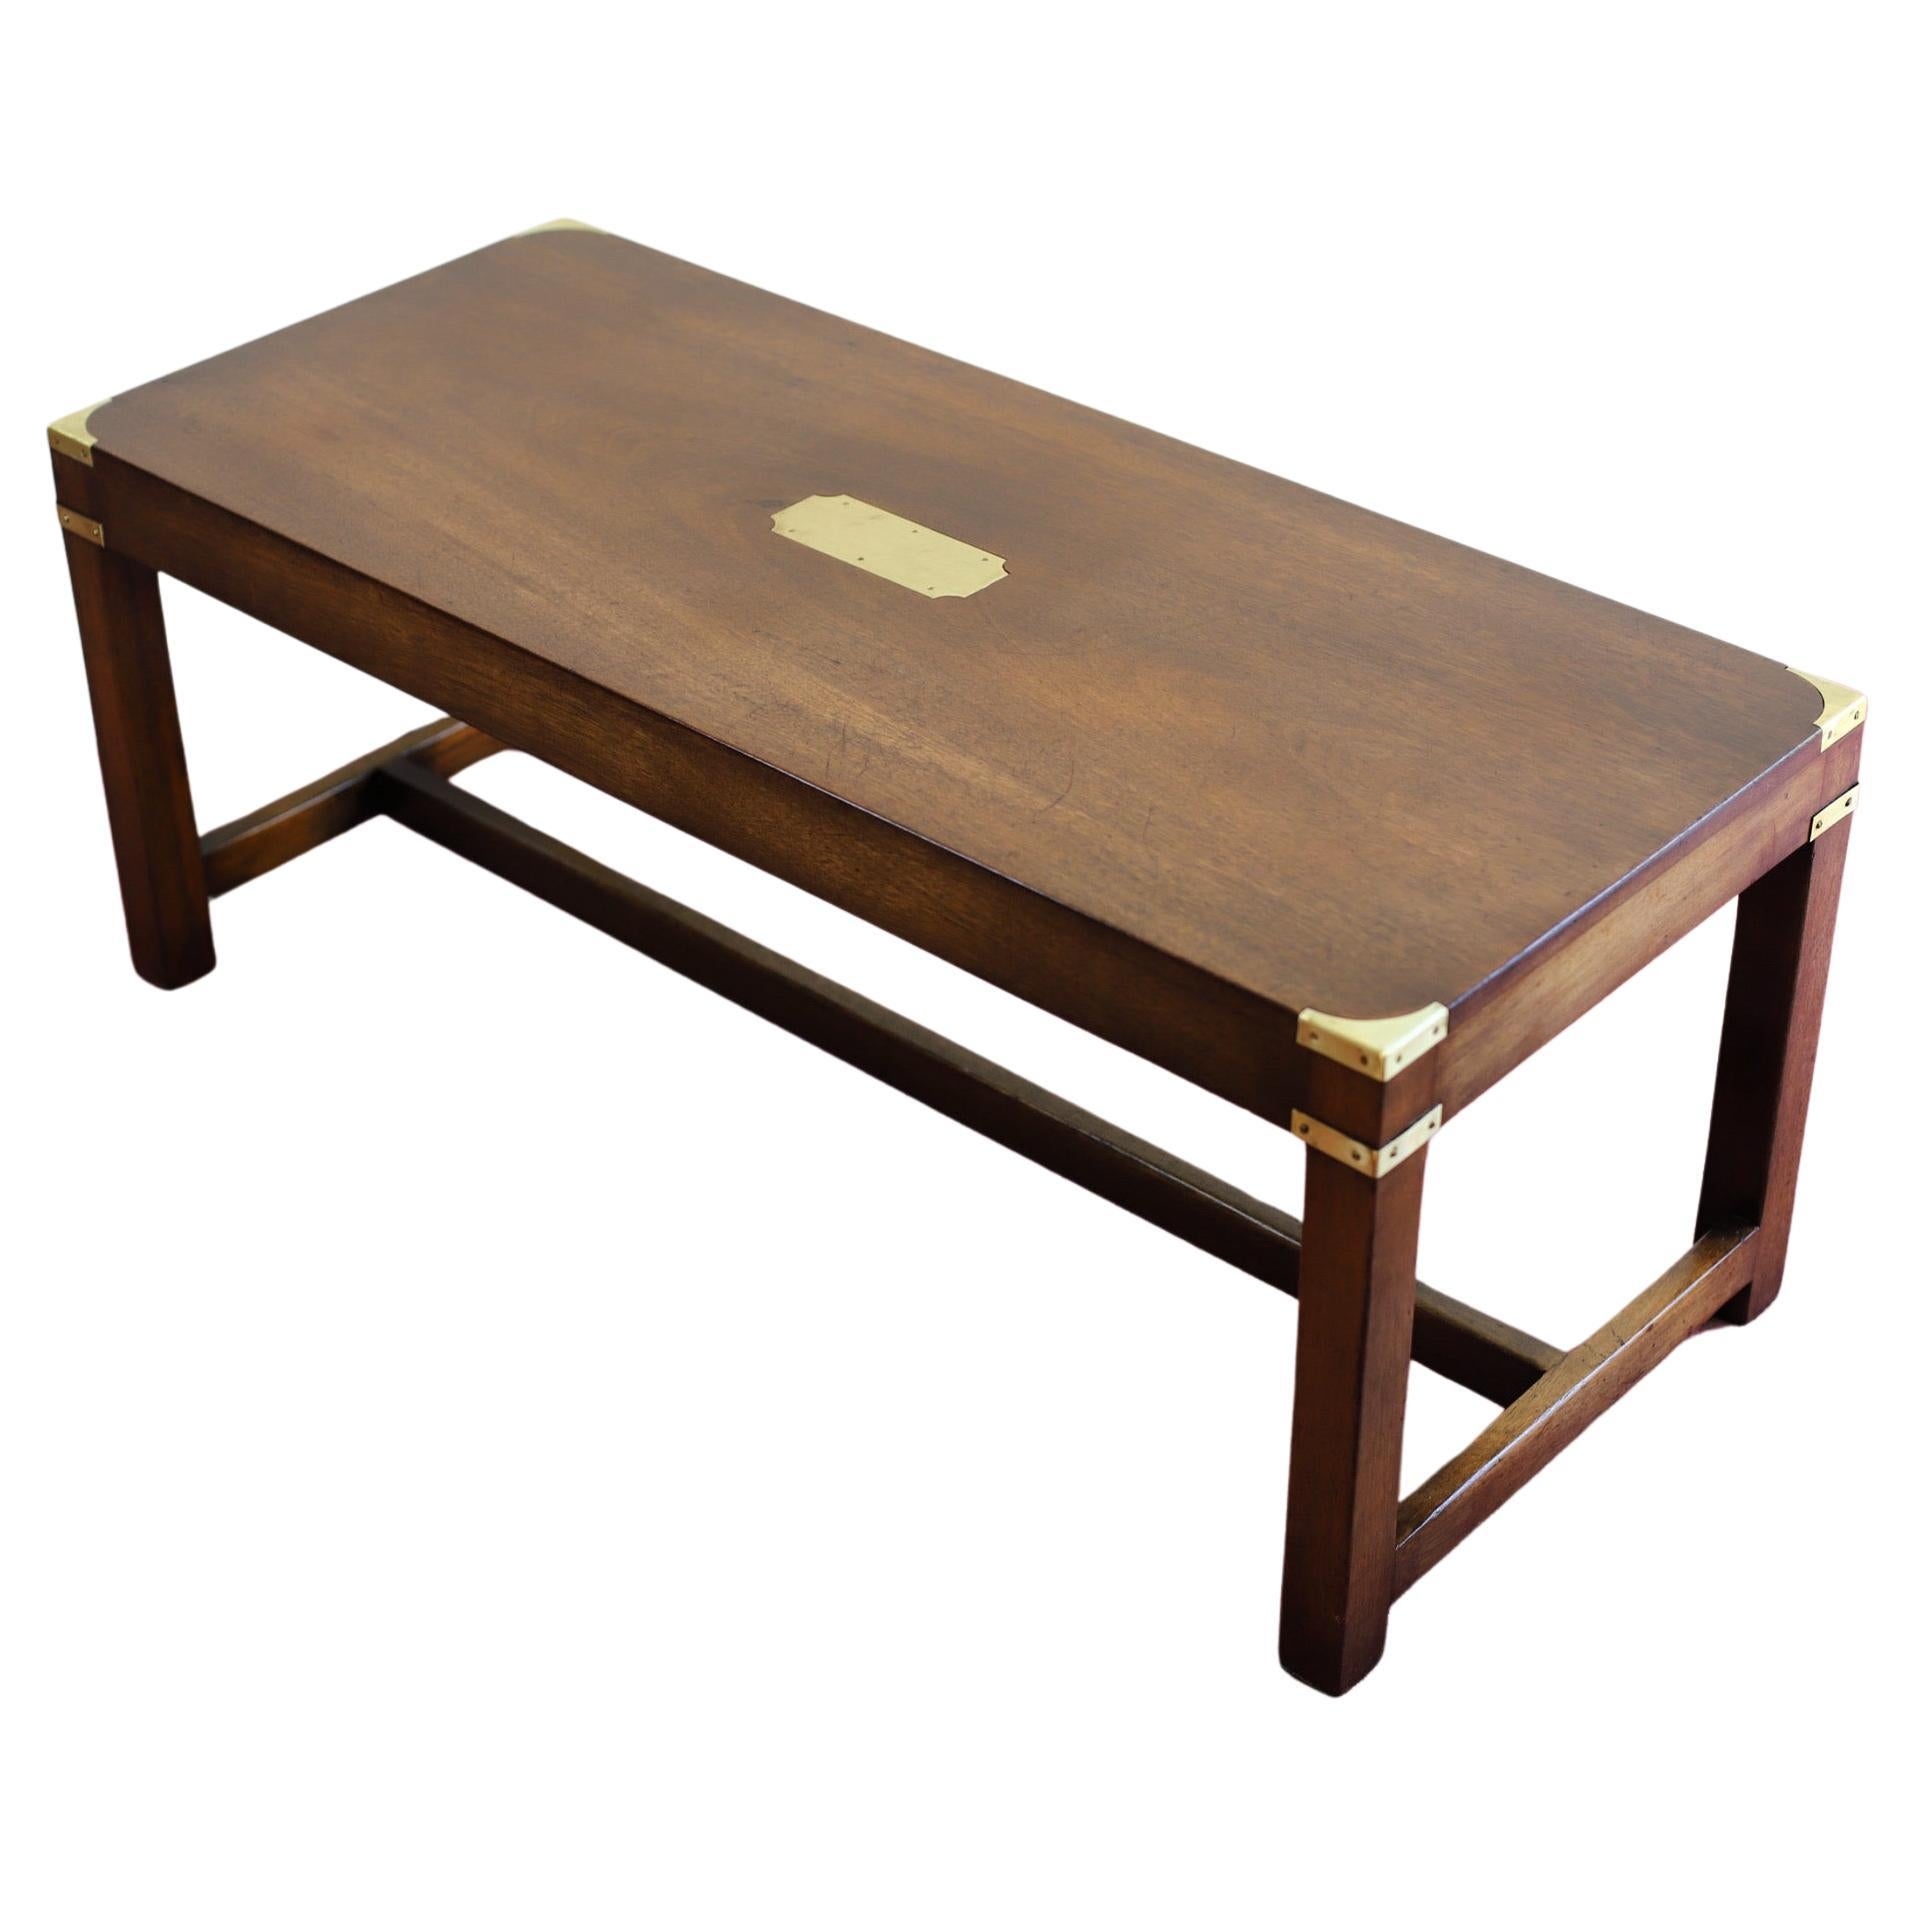 Lovelly Harrods Military Campaign Oak&Brass Coffee Table